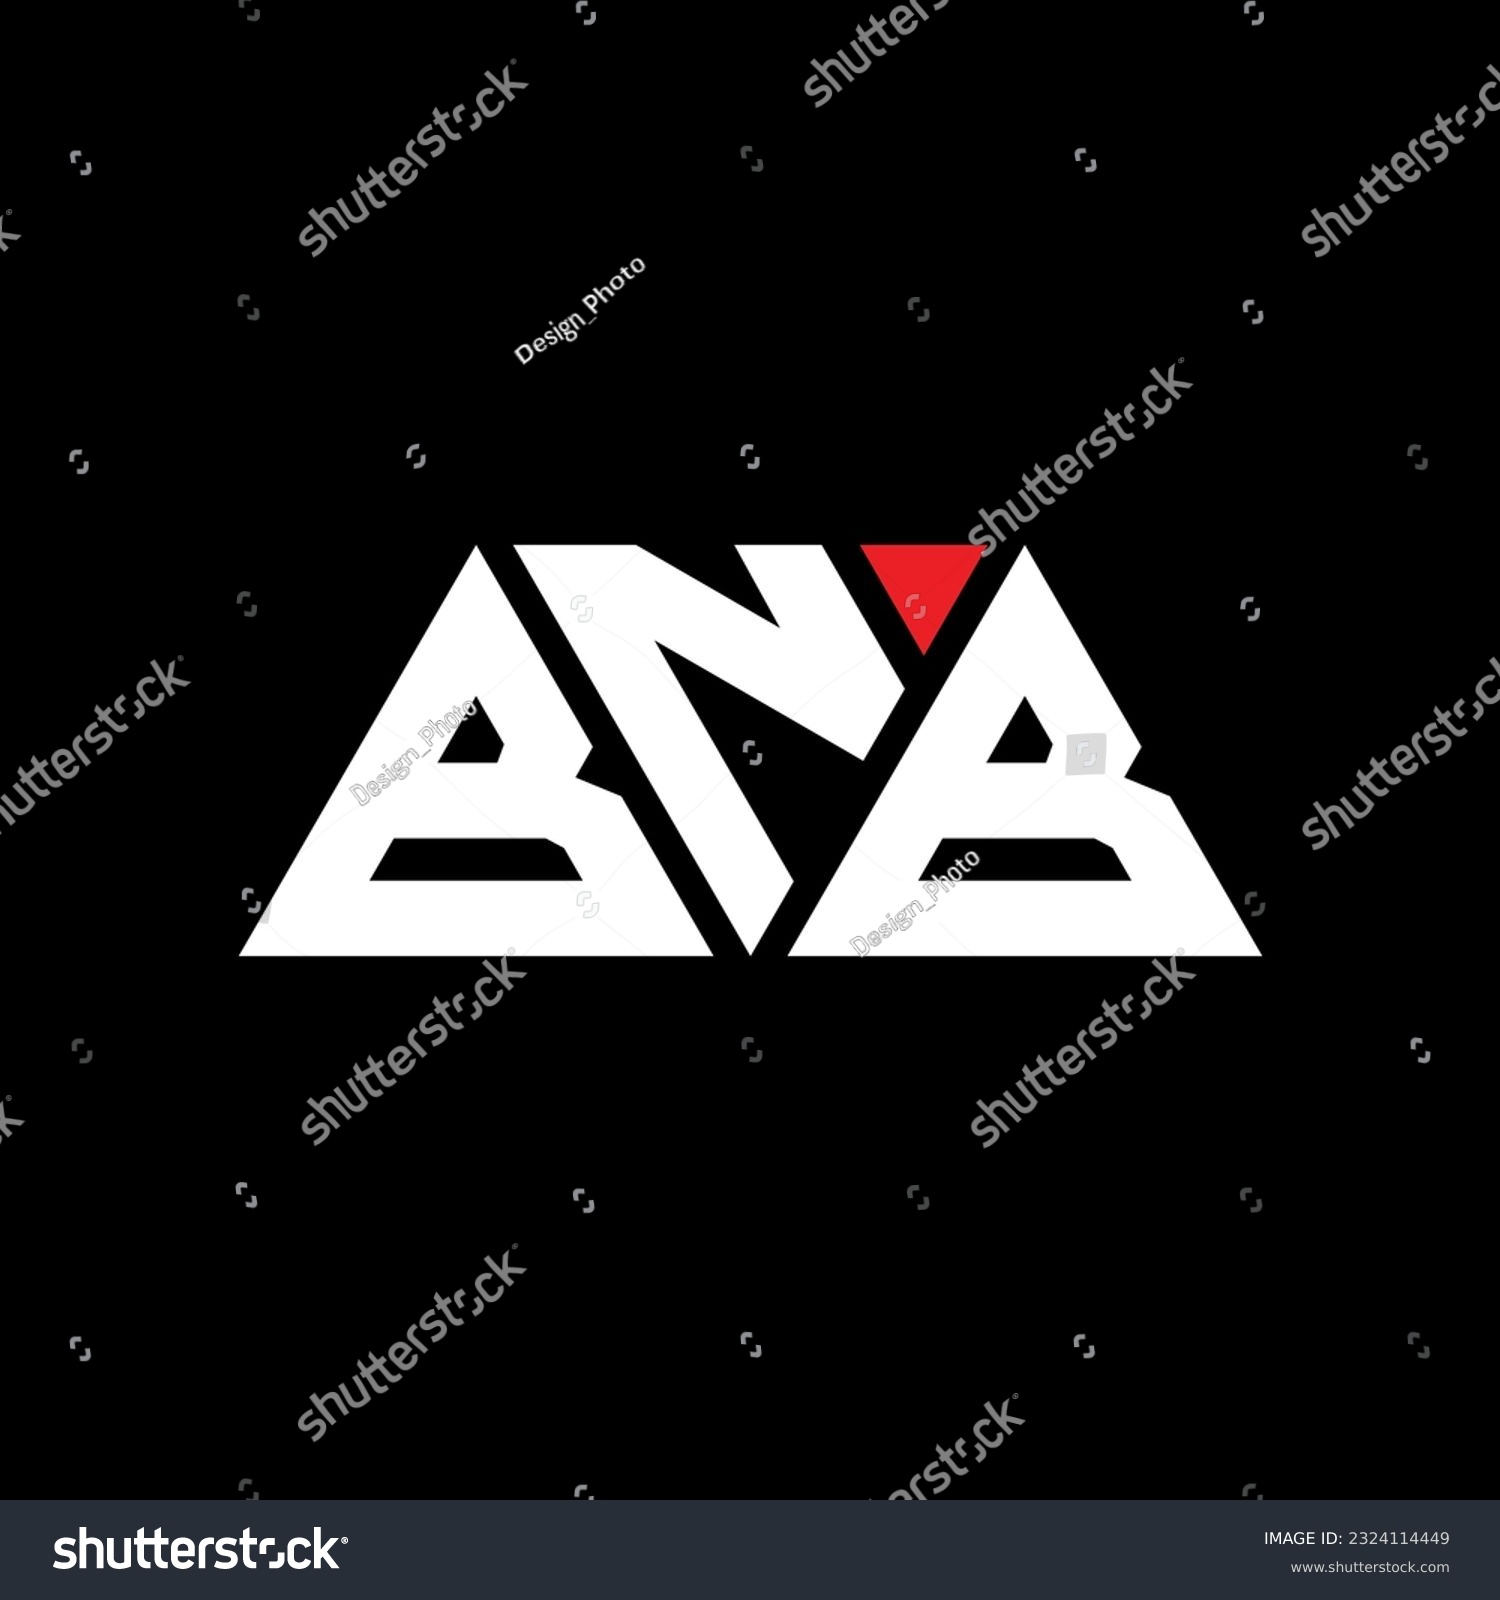 SVG of BNB triangle letter logo design with triangle shape. BNB triangle logo design monogram. BNB triangle vector logo template with red color. BNB triangular logo Simple, Elegant, and Luxurious design svg